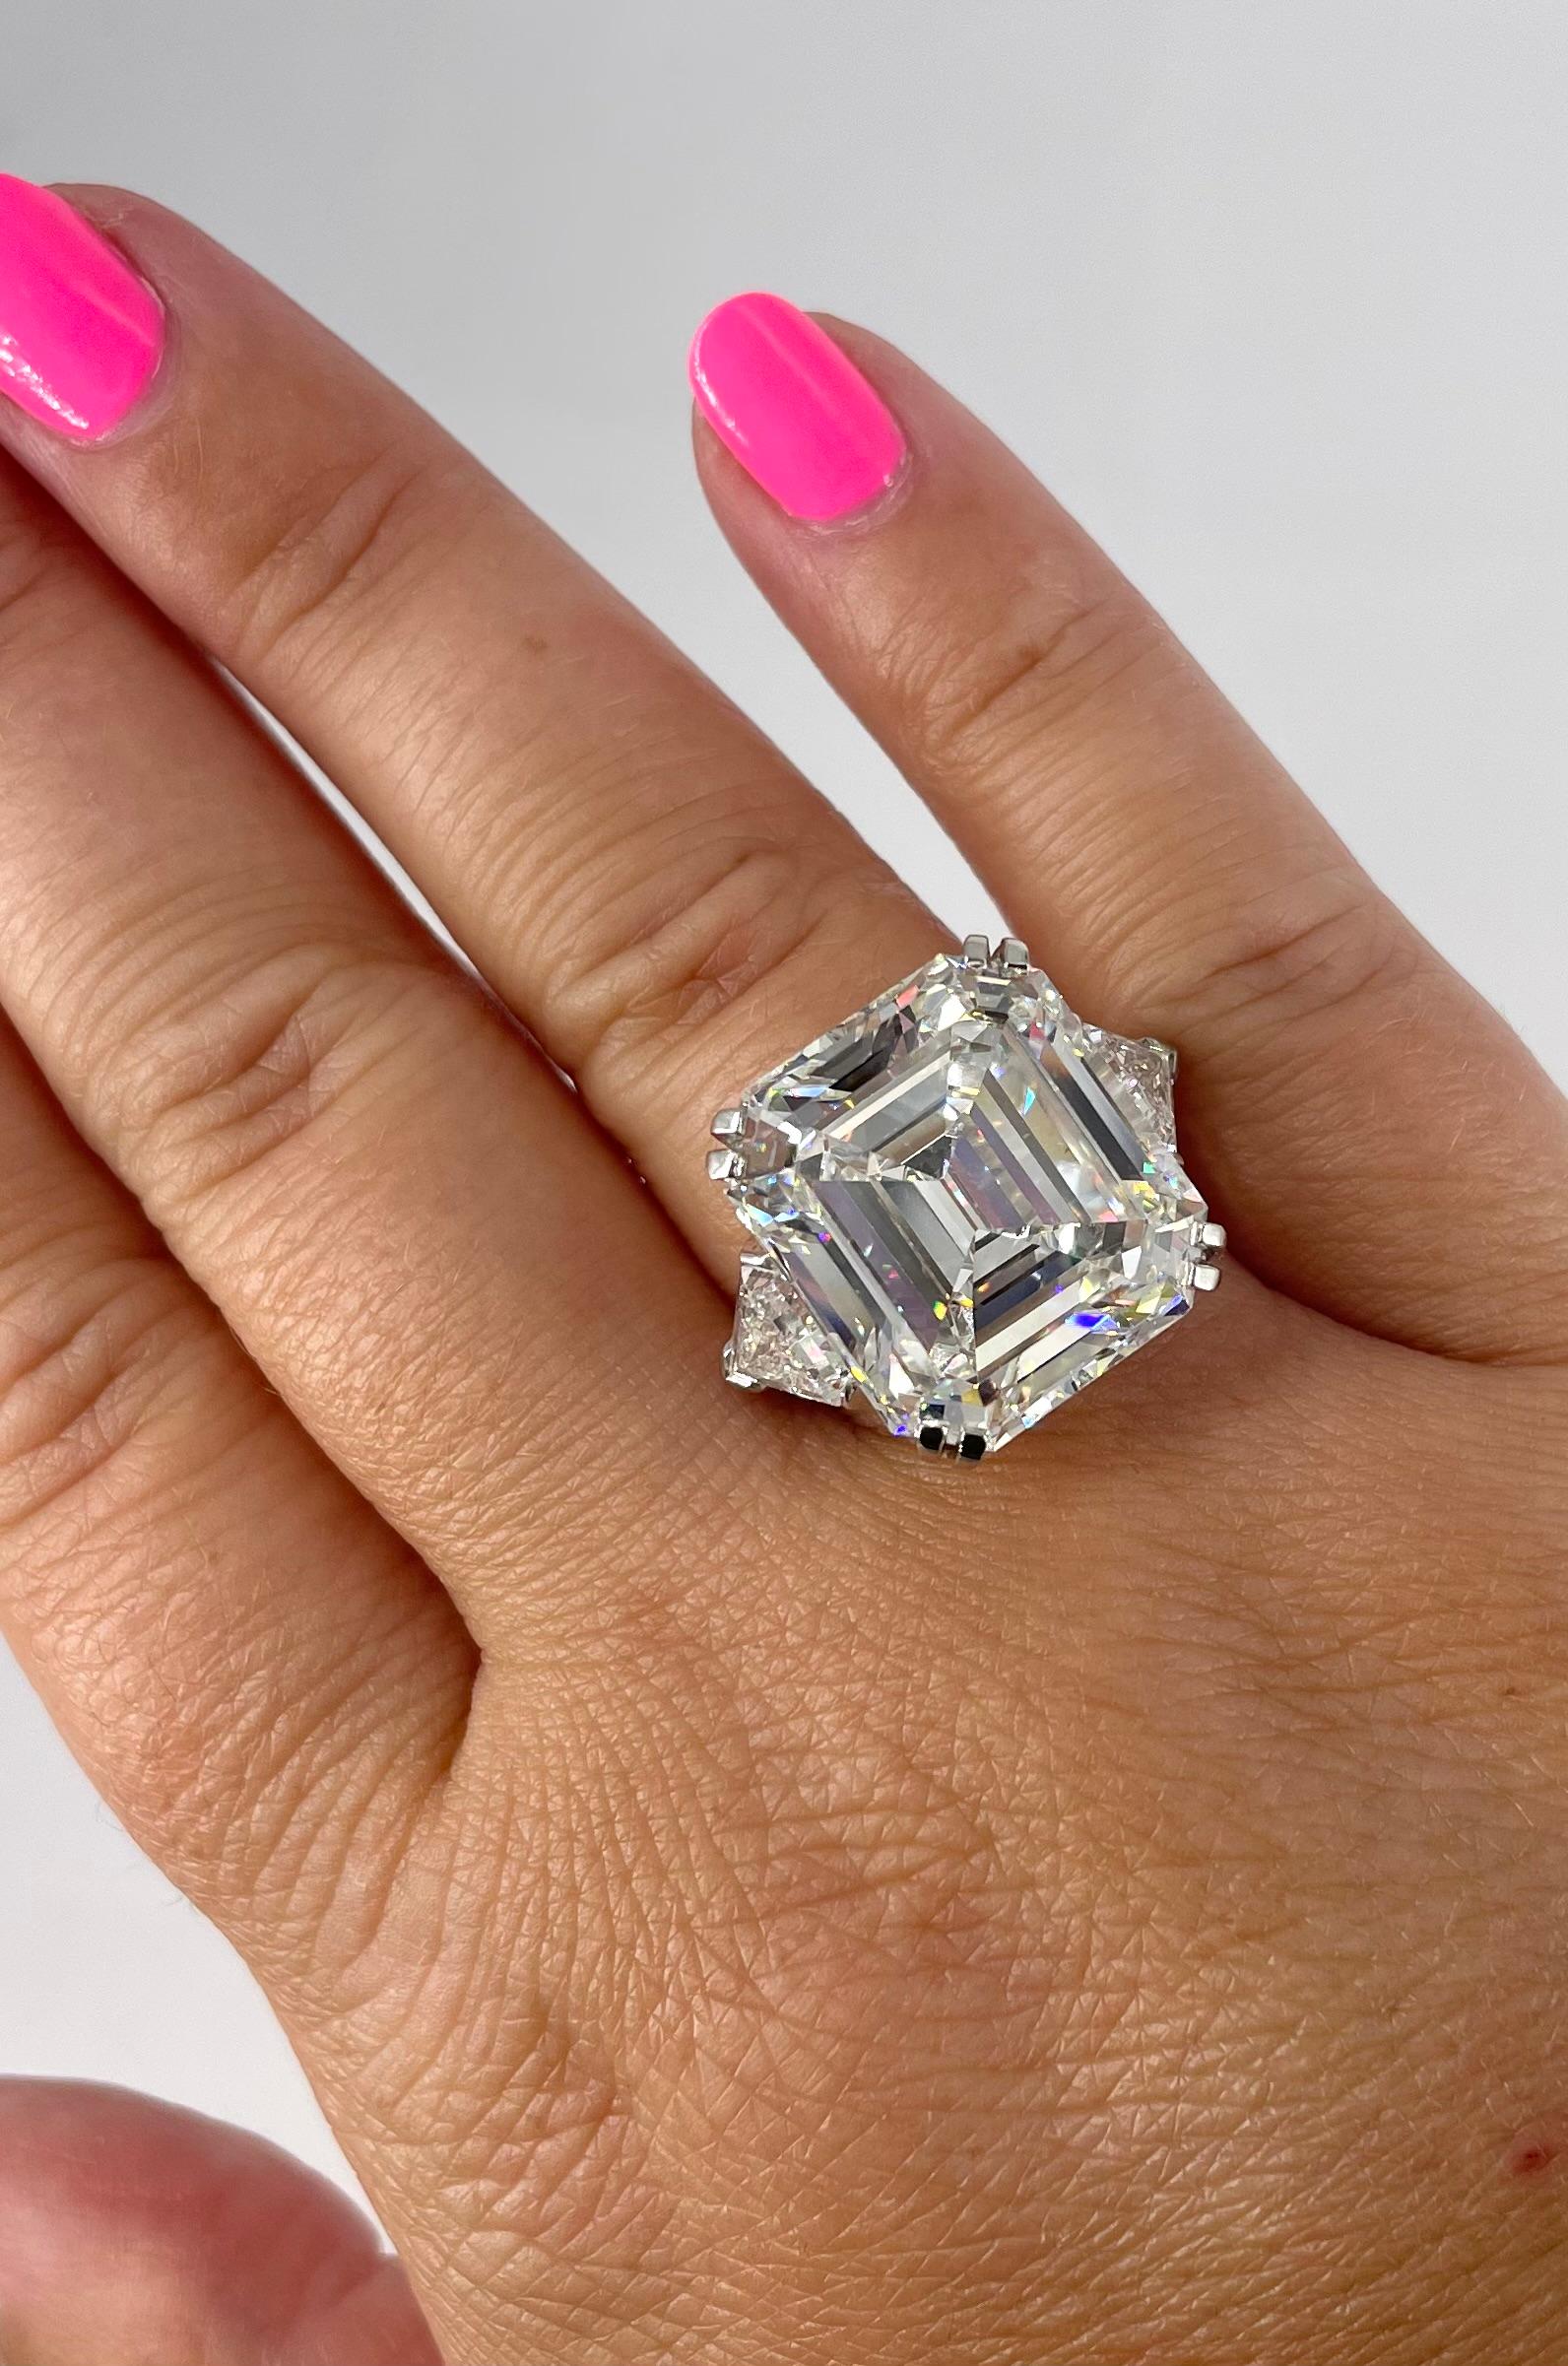 This important piece from the J. Birnbach vault is a ring to be passed down for generations. Featuring an exceptional 18.04 carat emerald cut diamond, this is a timeless piece celebrating the beauty of the stone. The center diamond is certified by